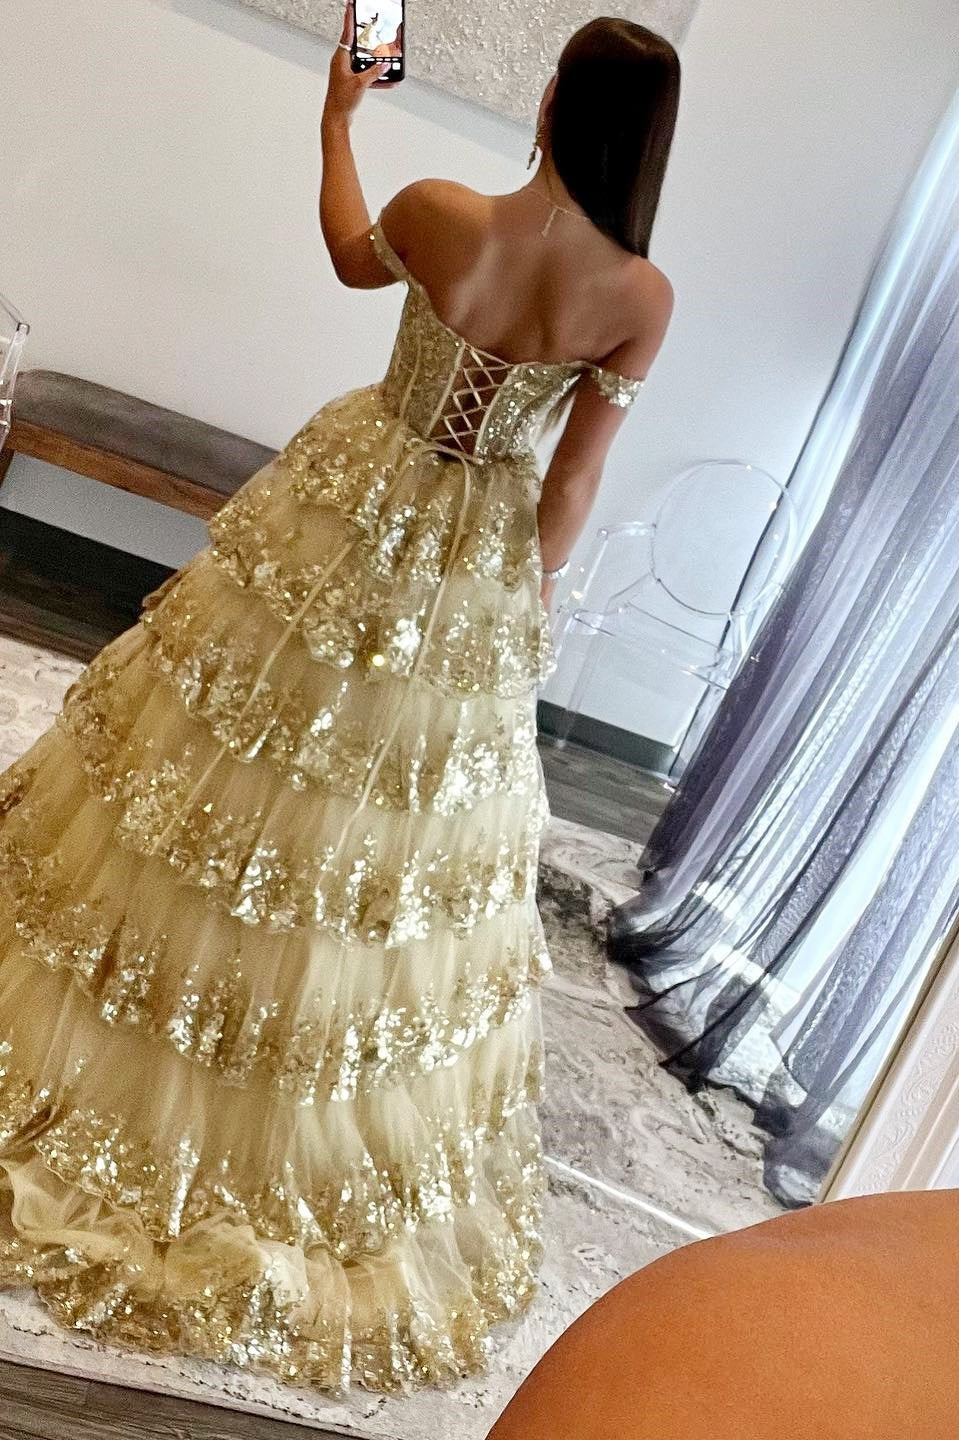 Gold Sequin Lace Off-the-Shoulder Ruffle Tiered Ball Gown